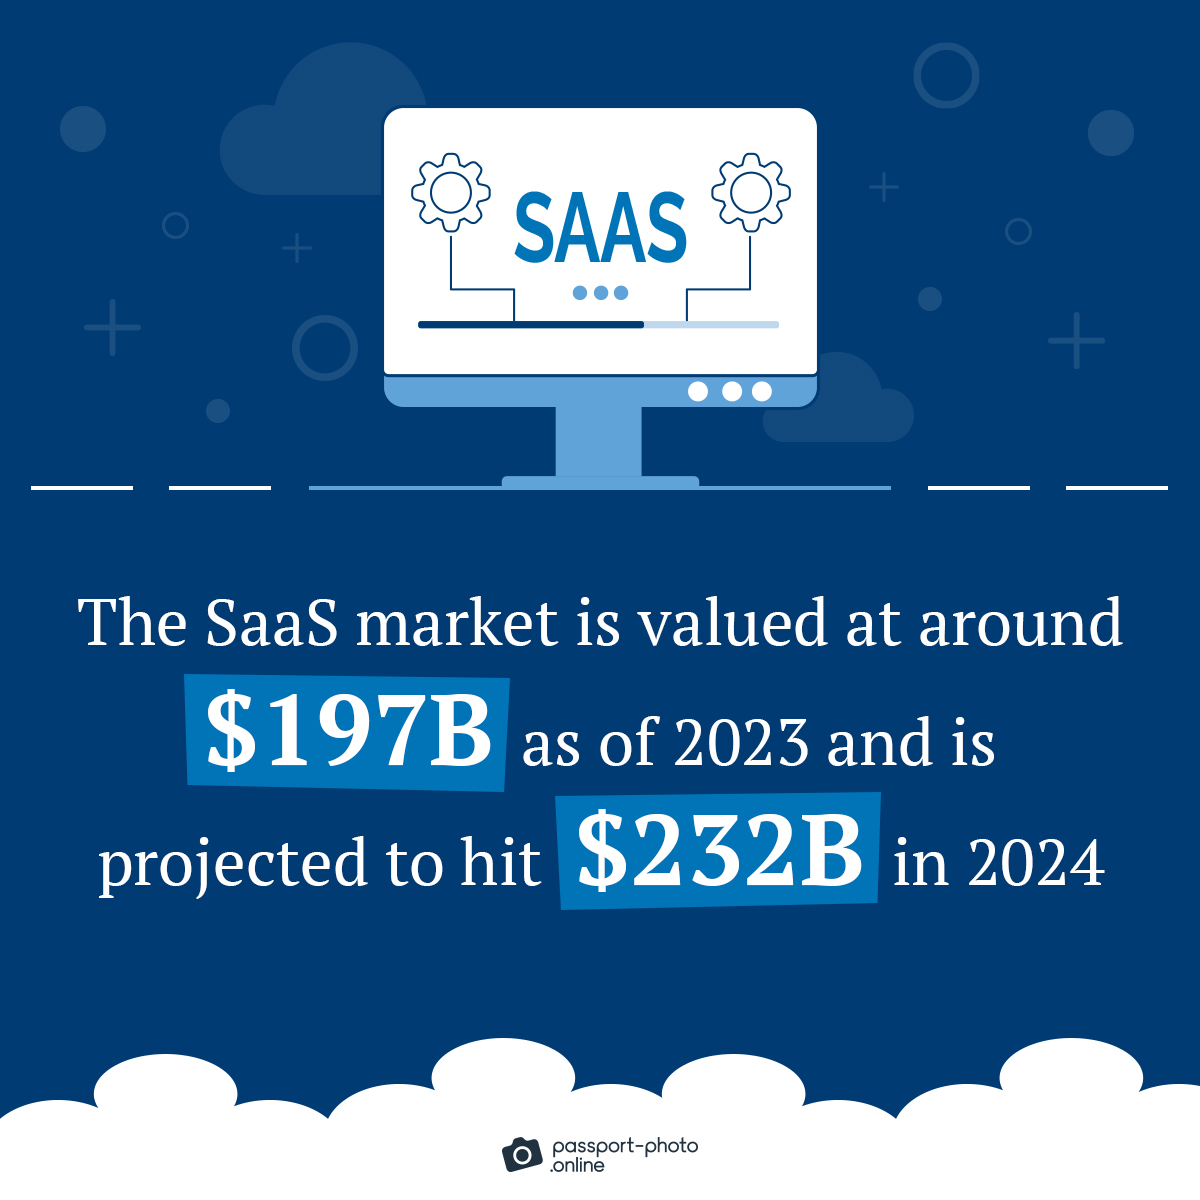 SaaS market is valued at ~$197B as of 2023 and will likely hit $232B in 2024